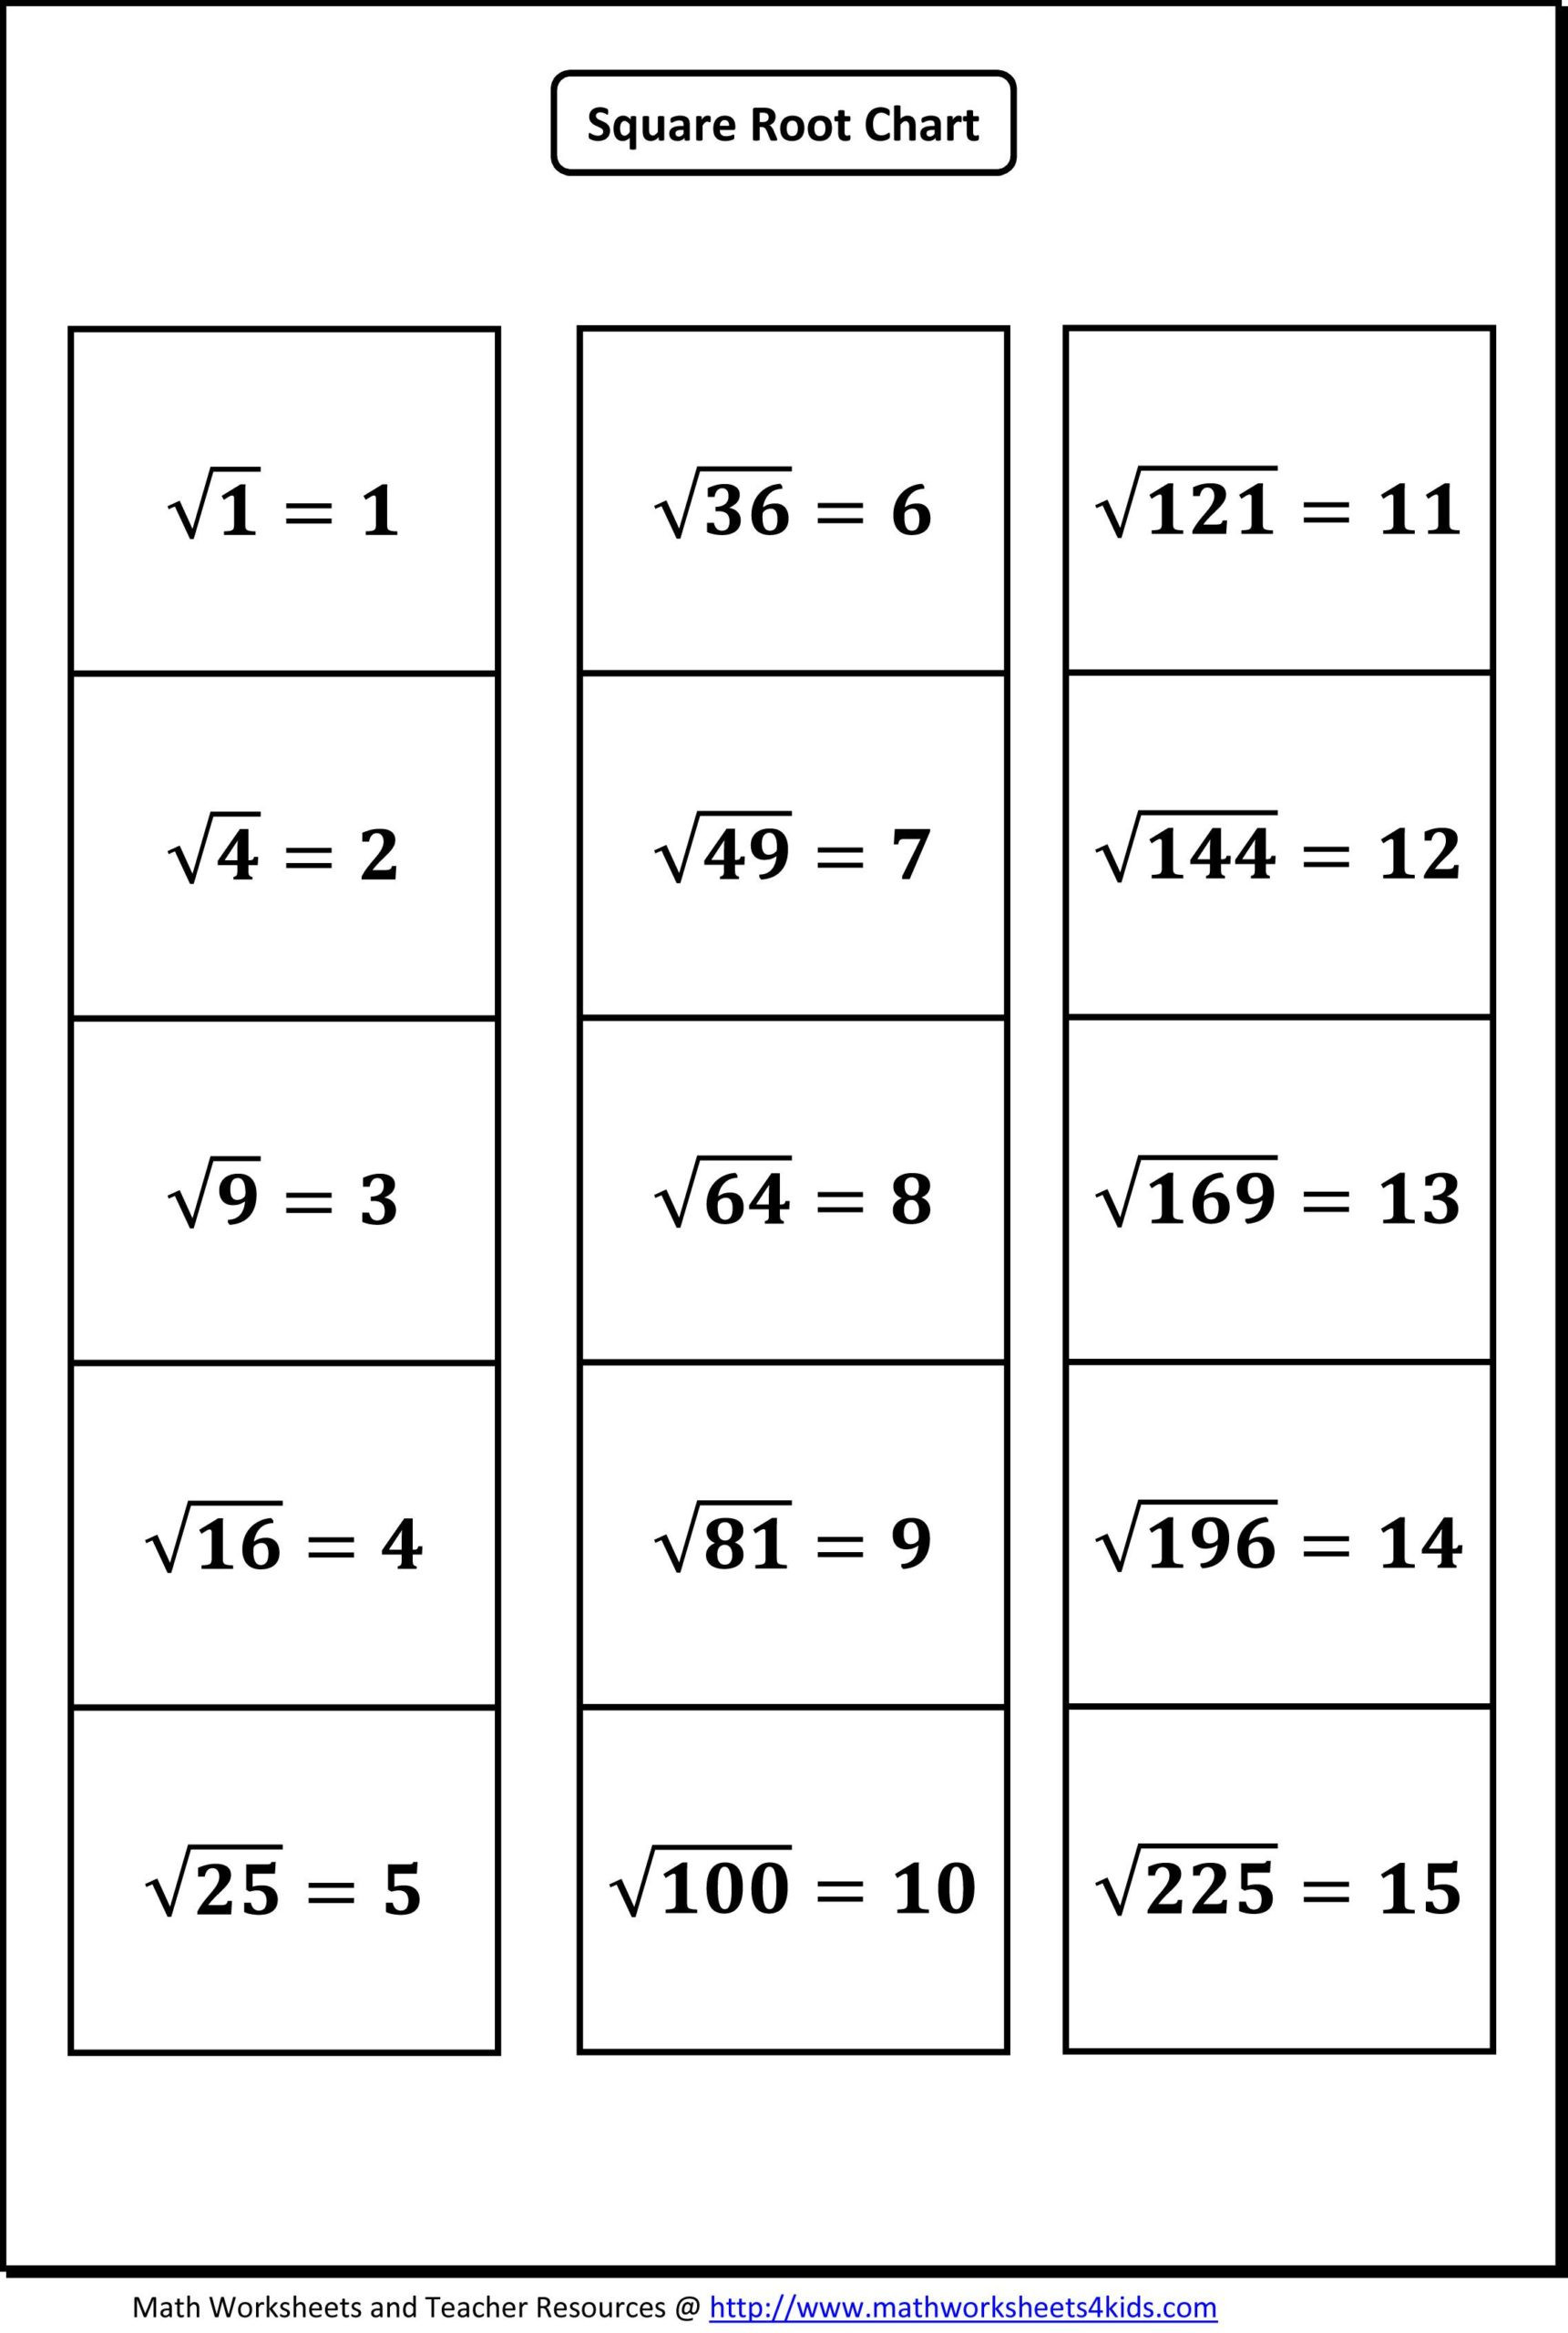 Simplifying Algebraic Fractions Worksheet Square Root Worksheets Find the whole Numbers Simplifying